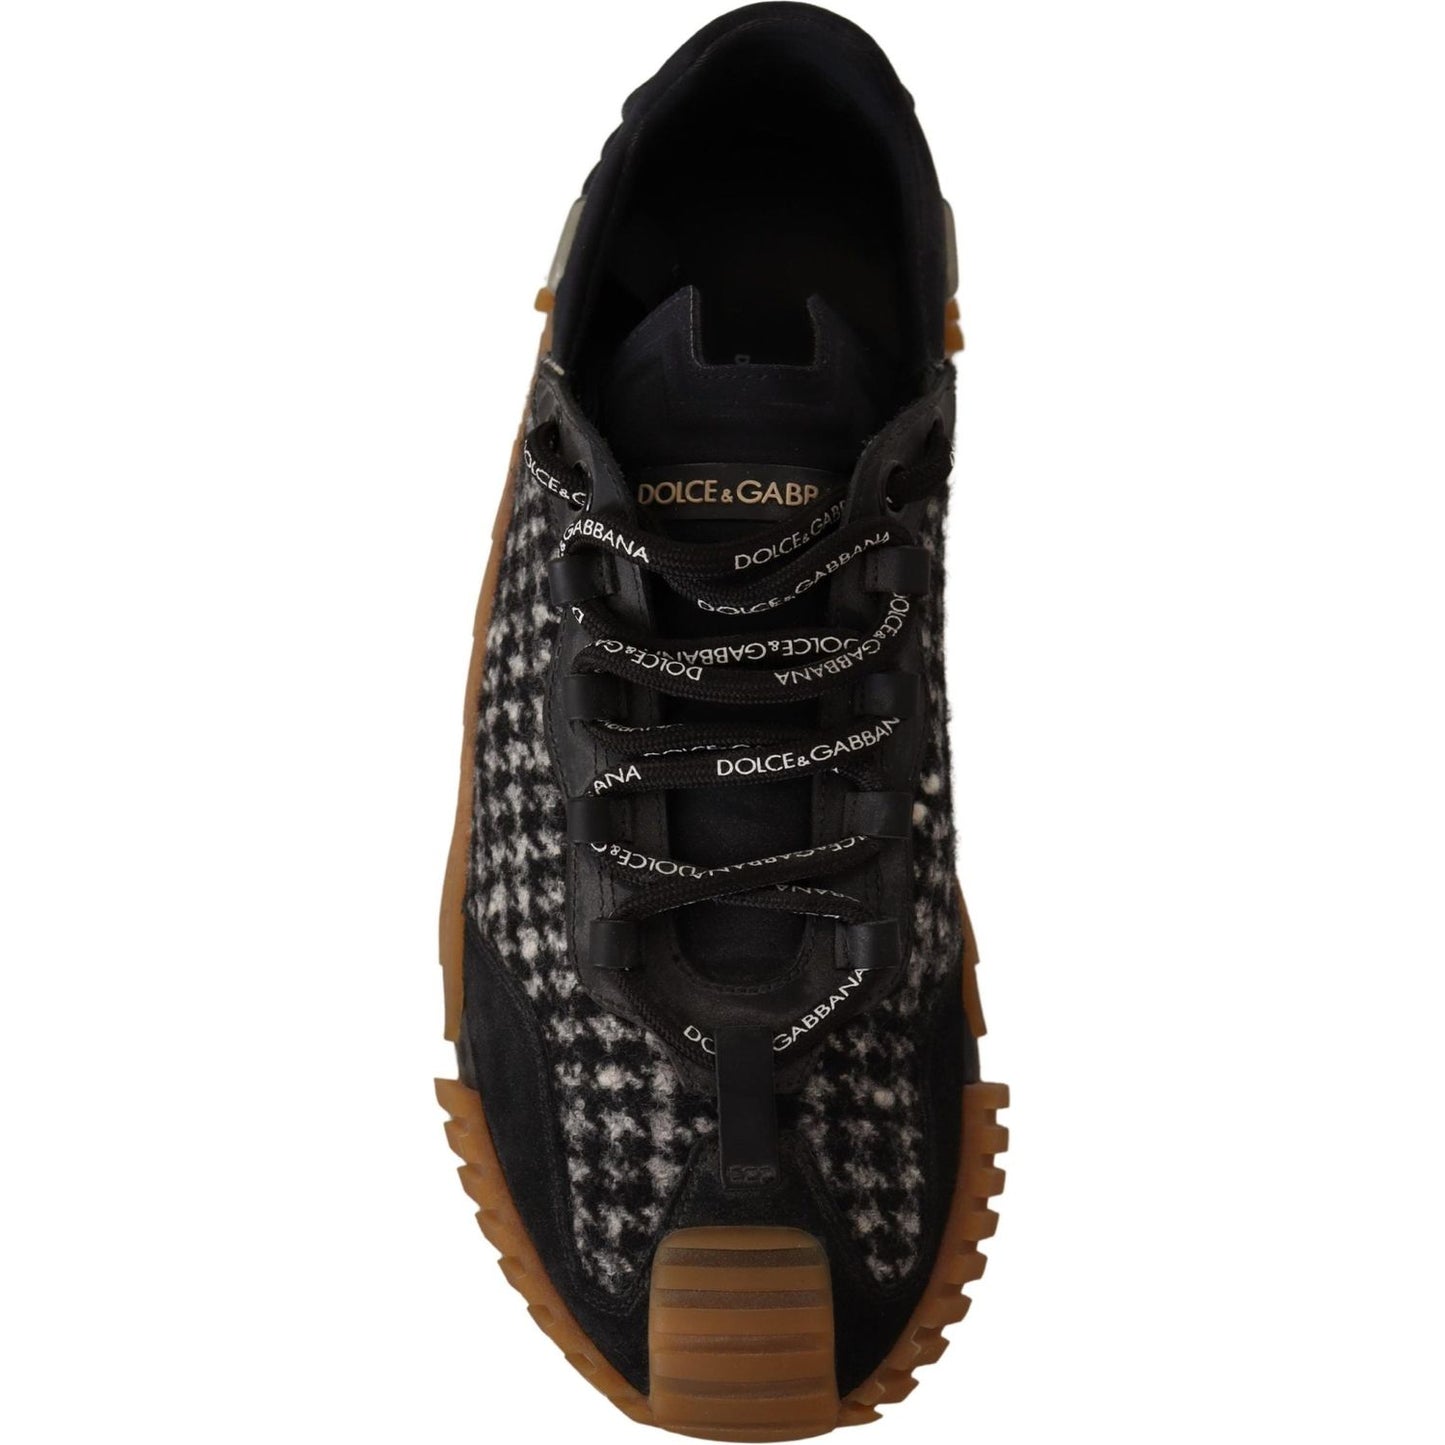 Dolce & Gabbana Elegant Textured NS1 Sneaker Charisma black-white-fabric-lace-up-ns1-sneakers